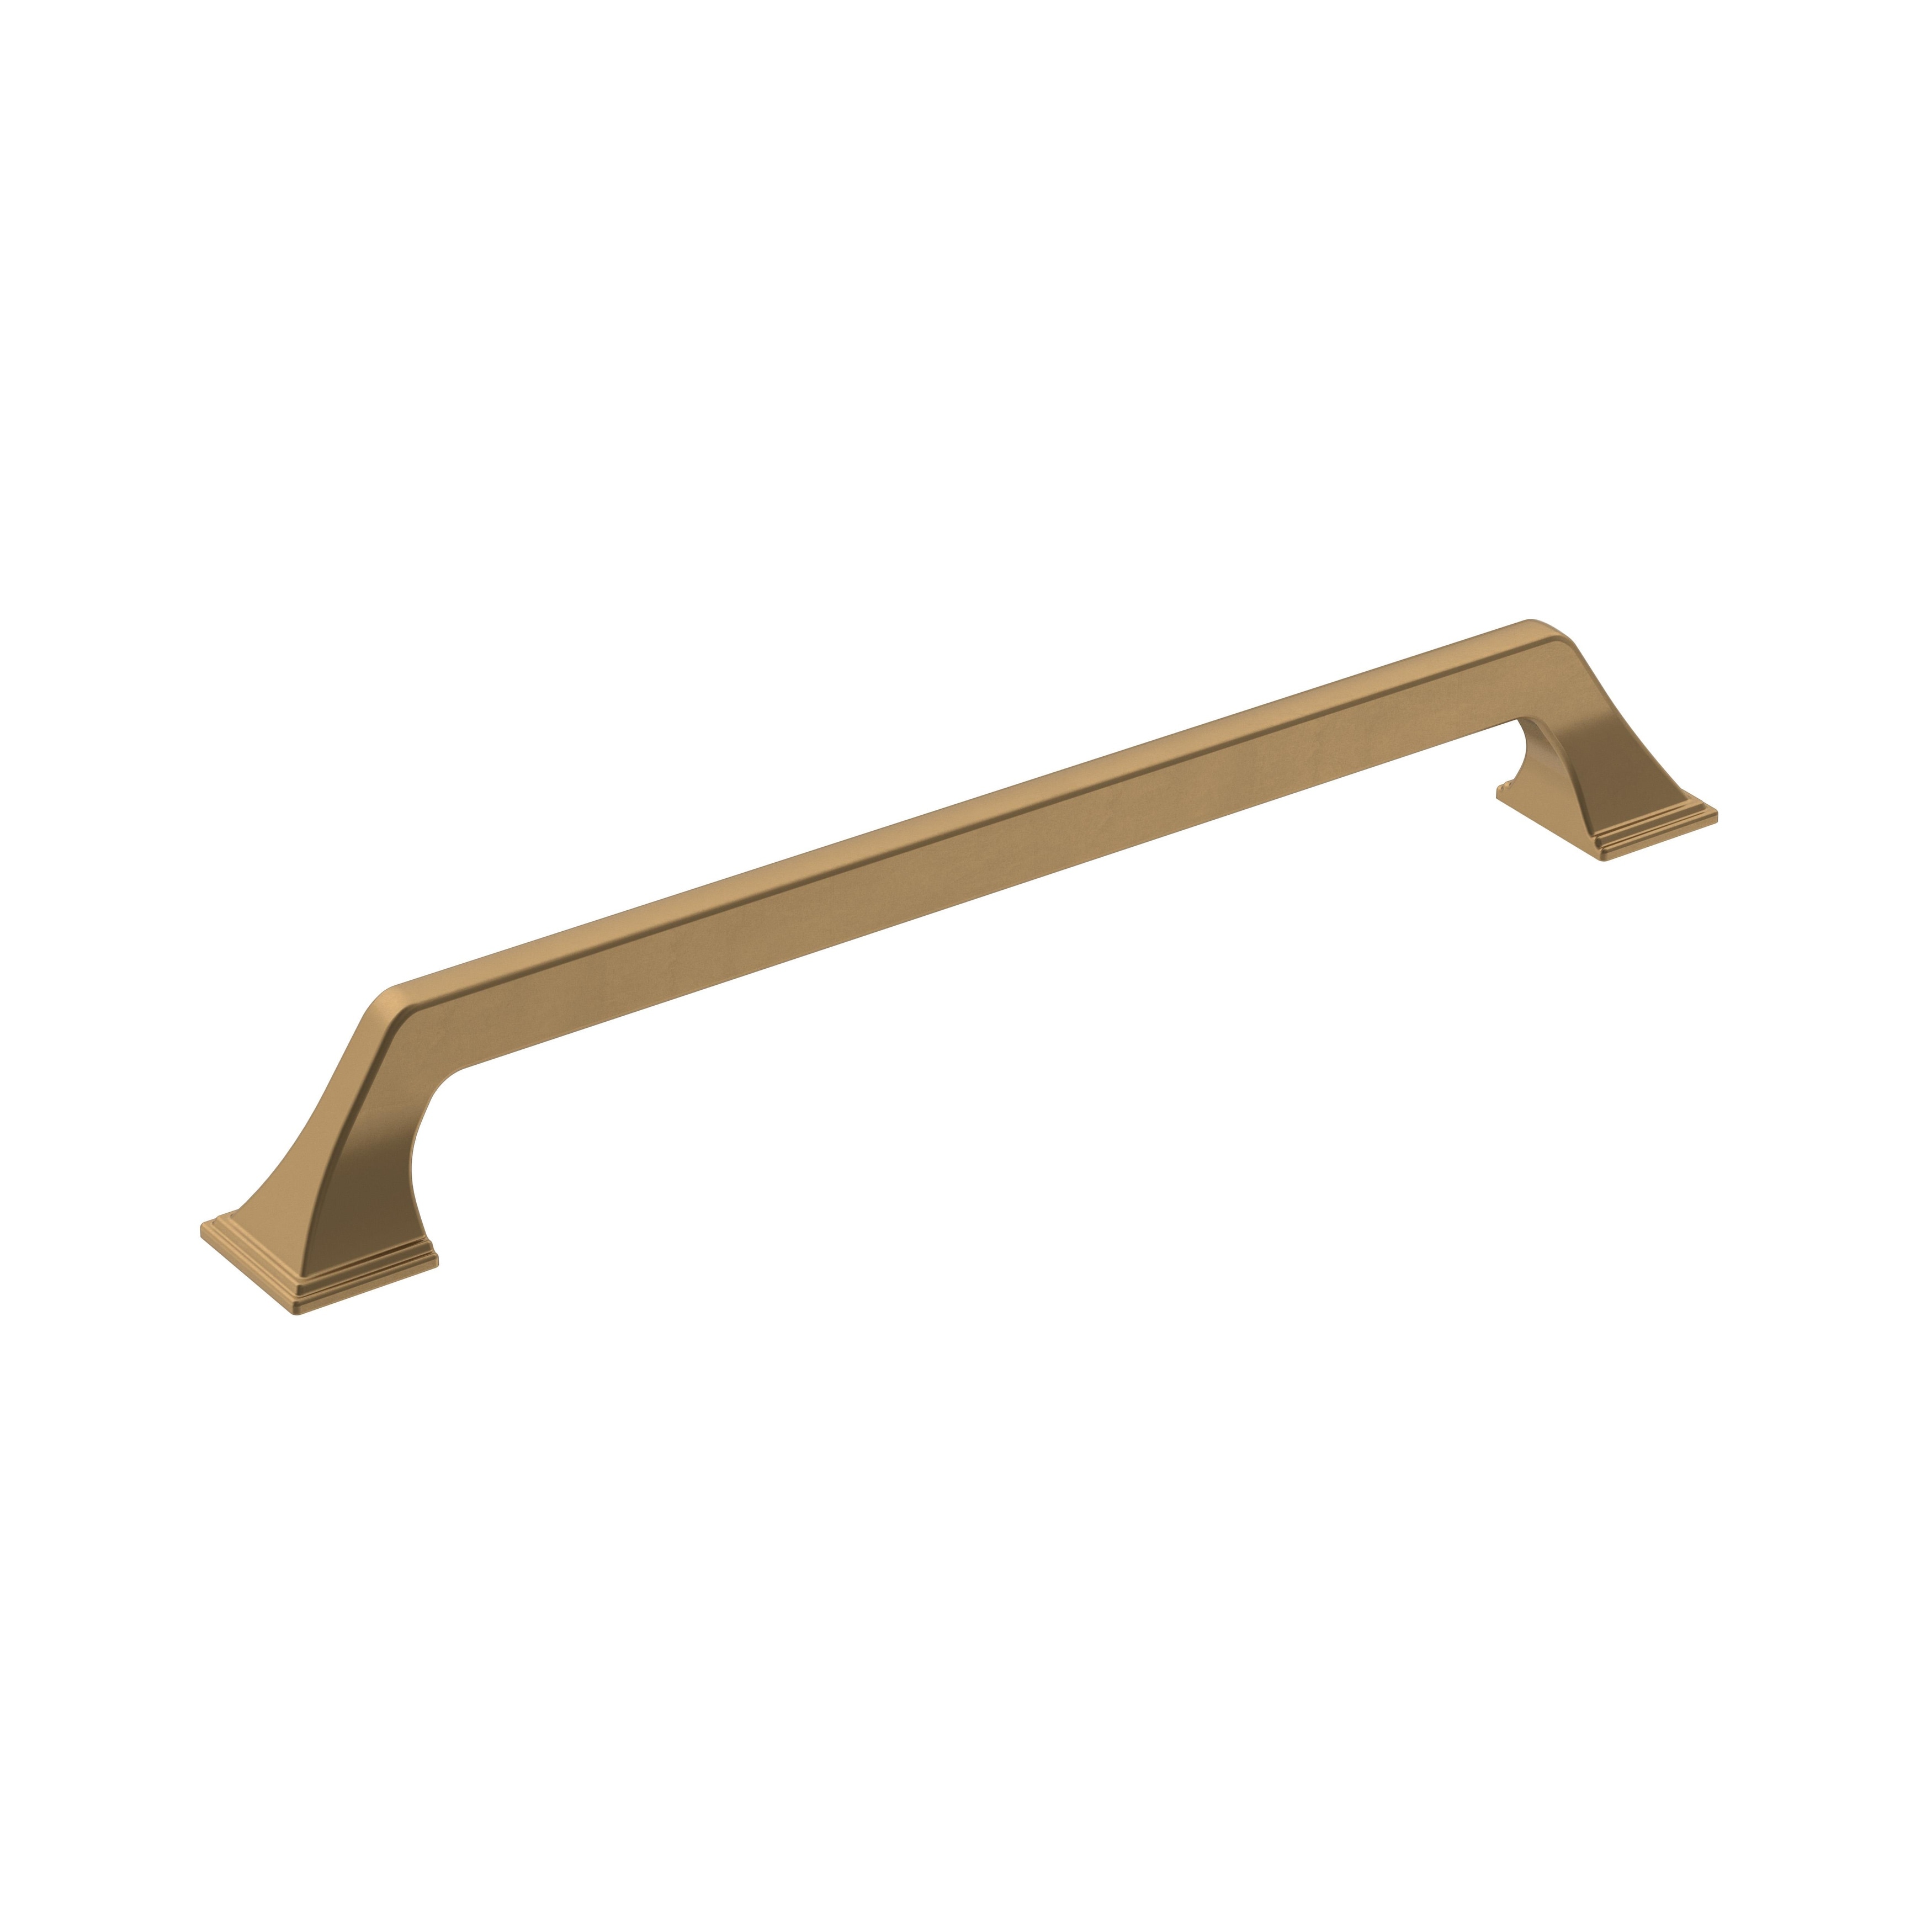 Exceed 8-13/16 in (224 mm) Center-to-Center Champagne Bronze Cabinet Pull  8.8125 On Sale Bed Bath  Beyond 32810513